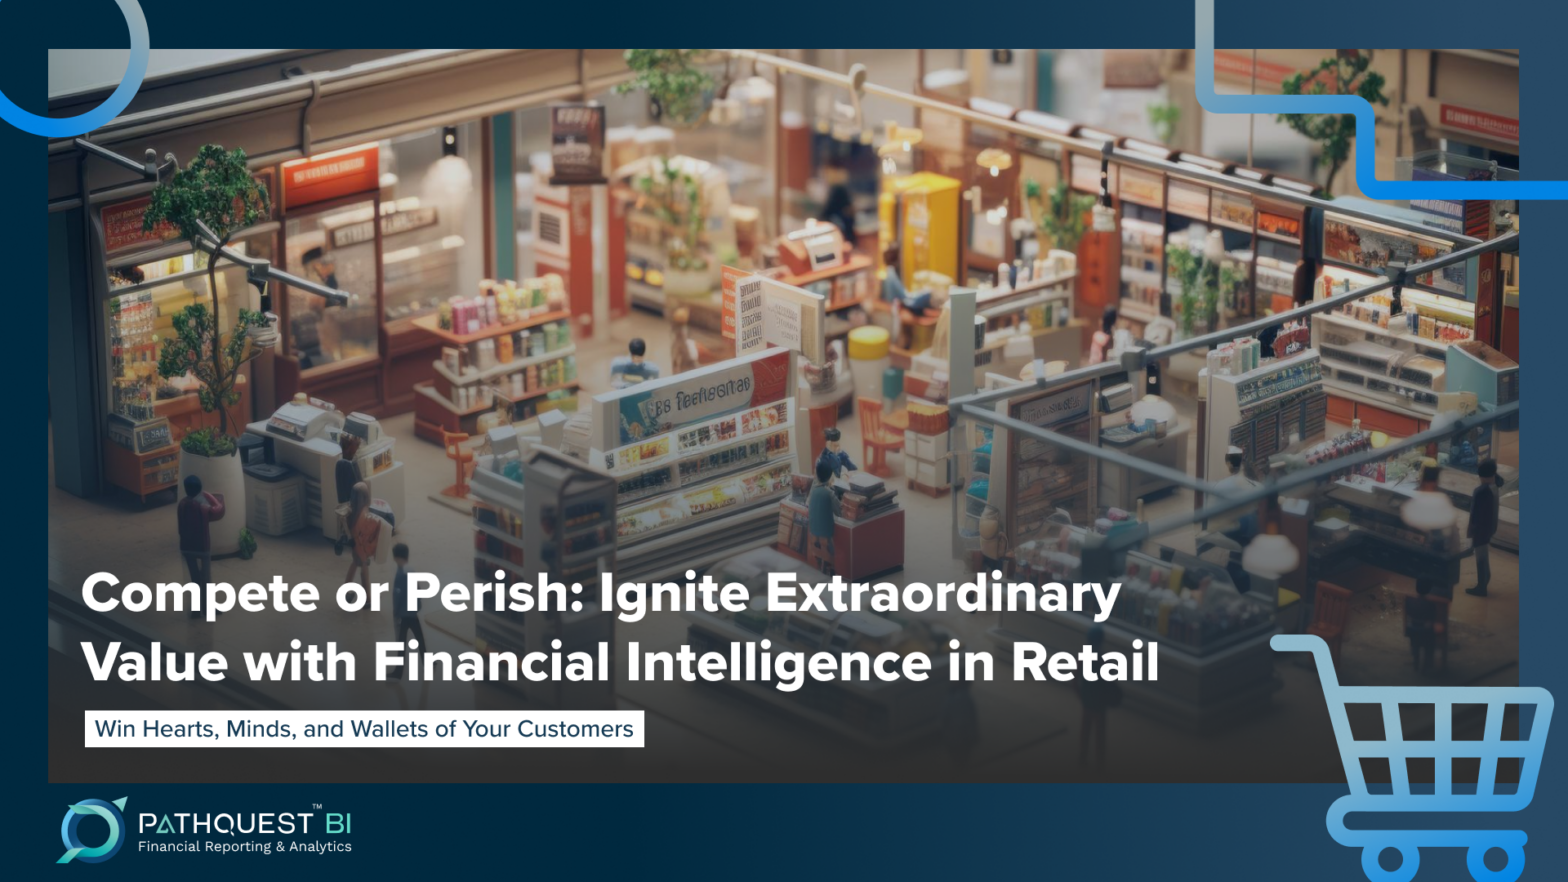 Compete or Perish Ignite Extraordinary Value with Financial Intelligence in Retail